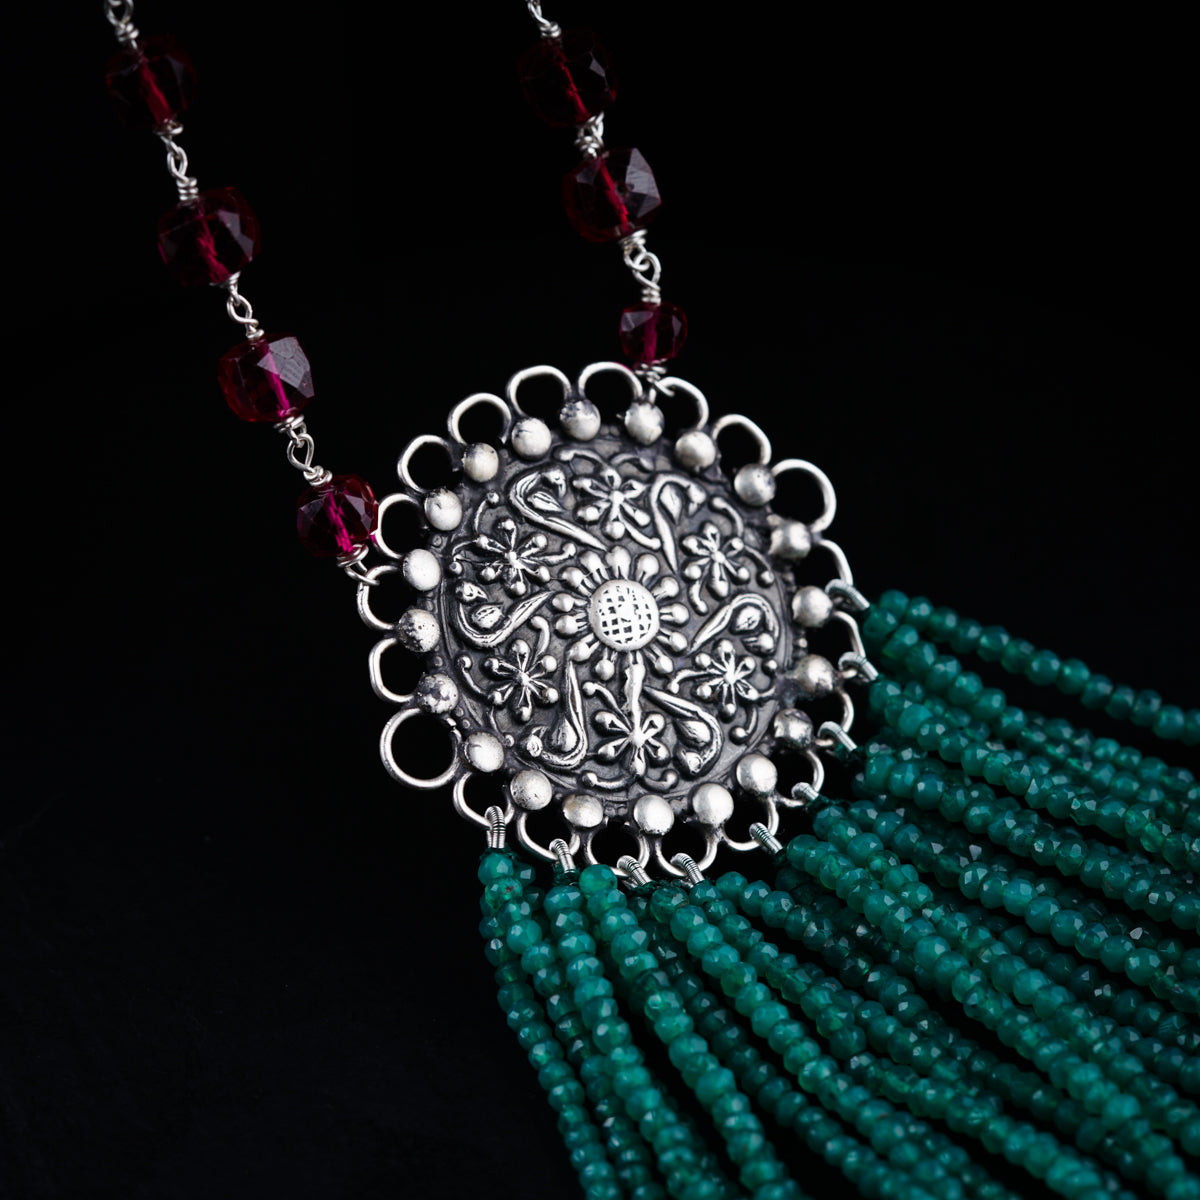 The Jharana Necklace - Onyx and labmade rubies